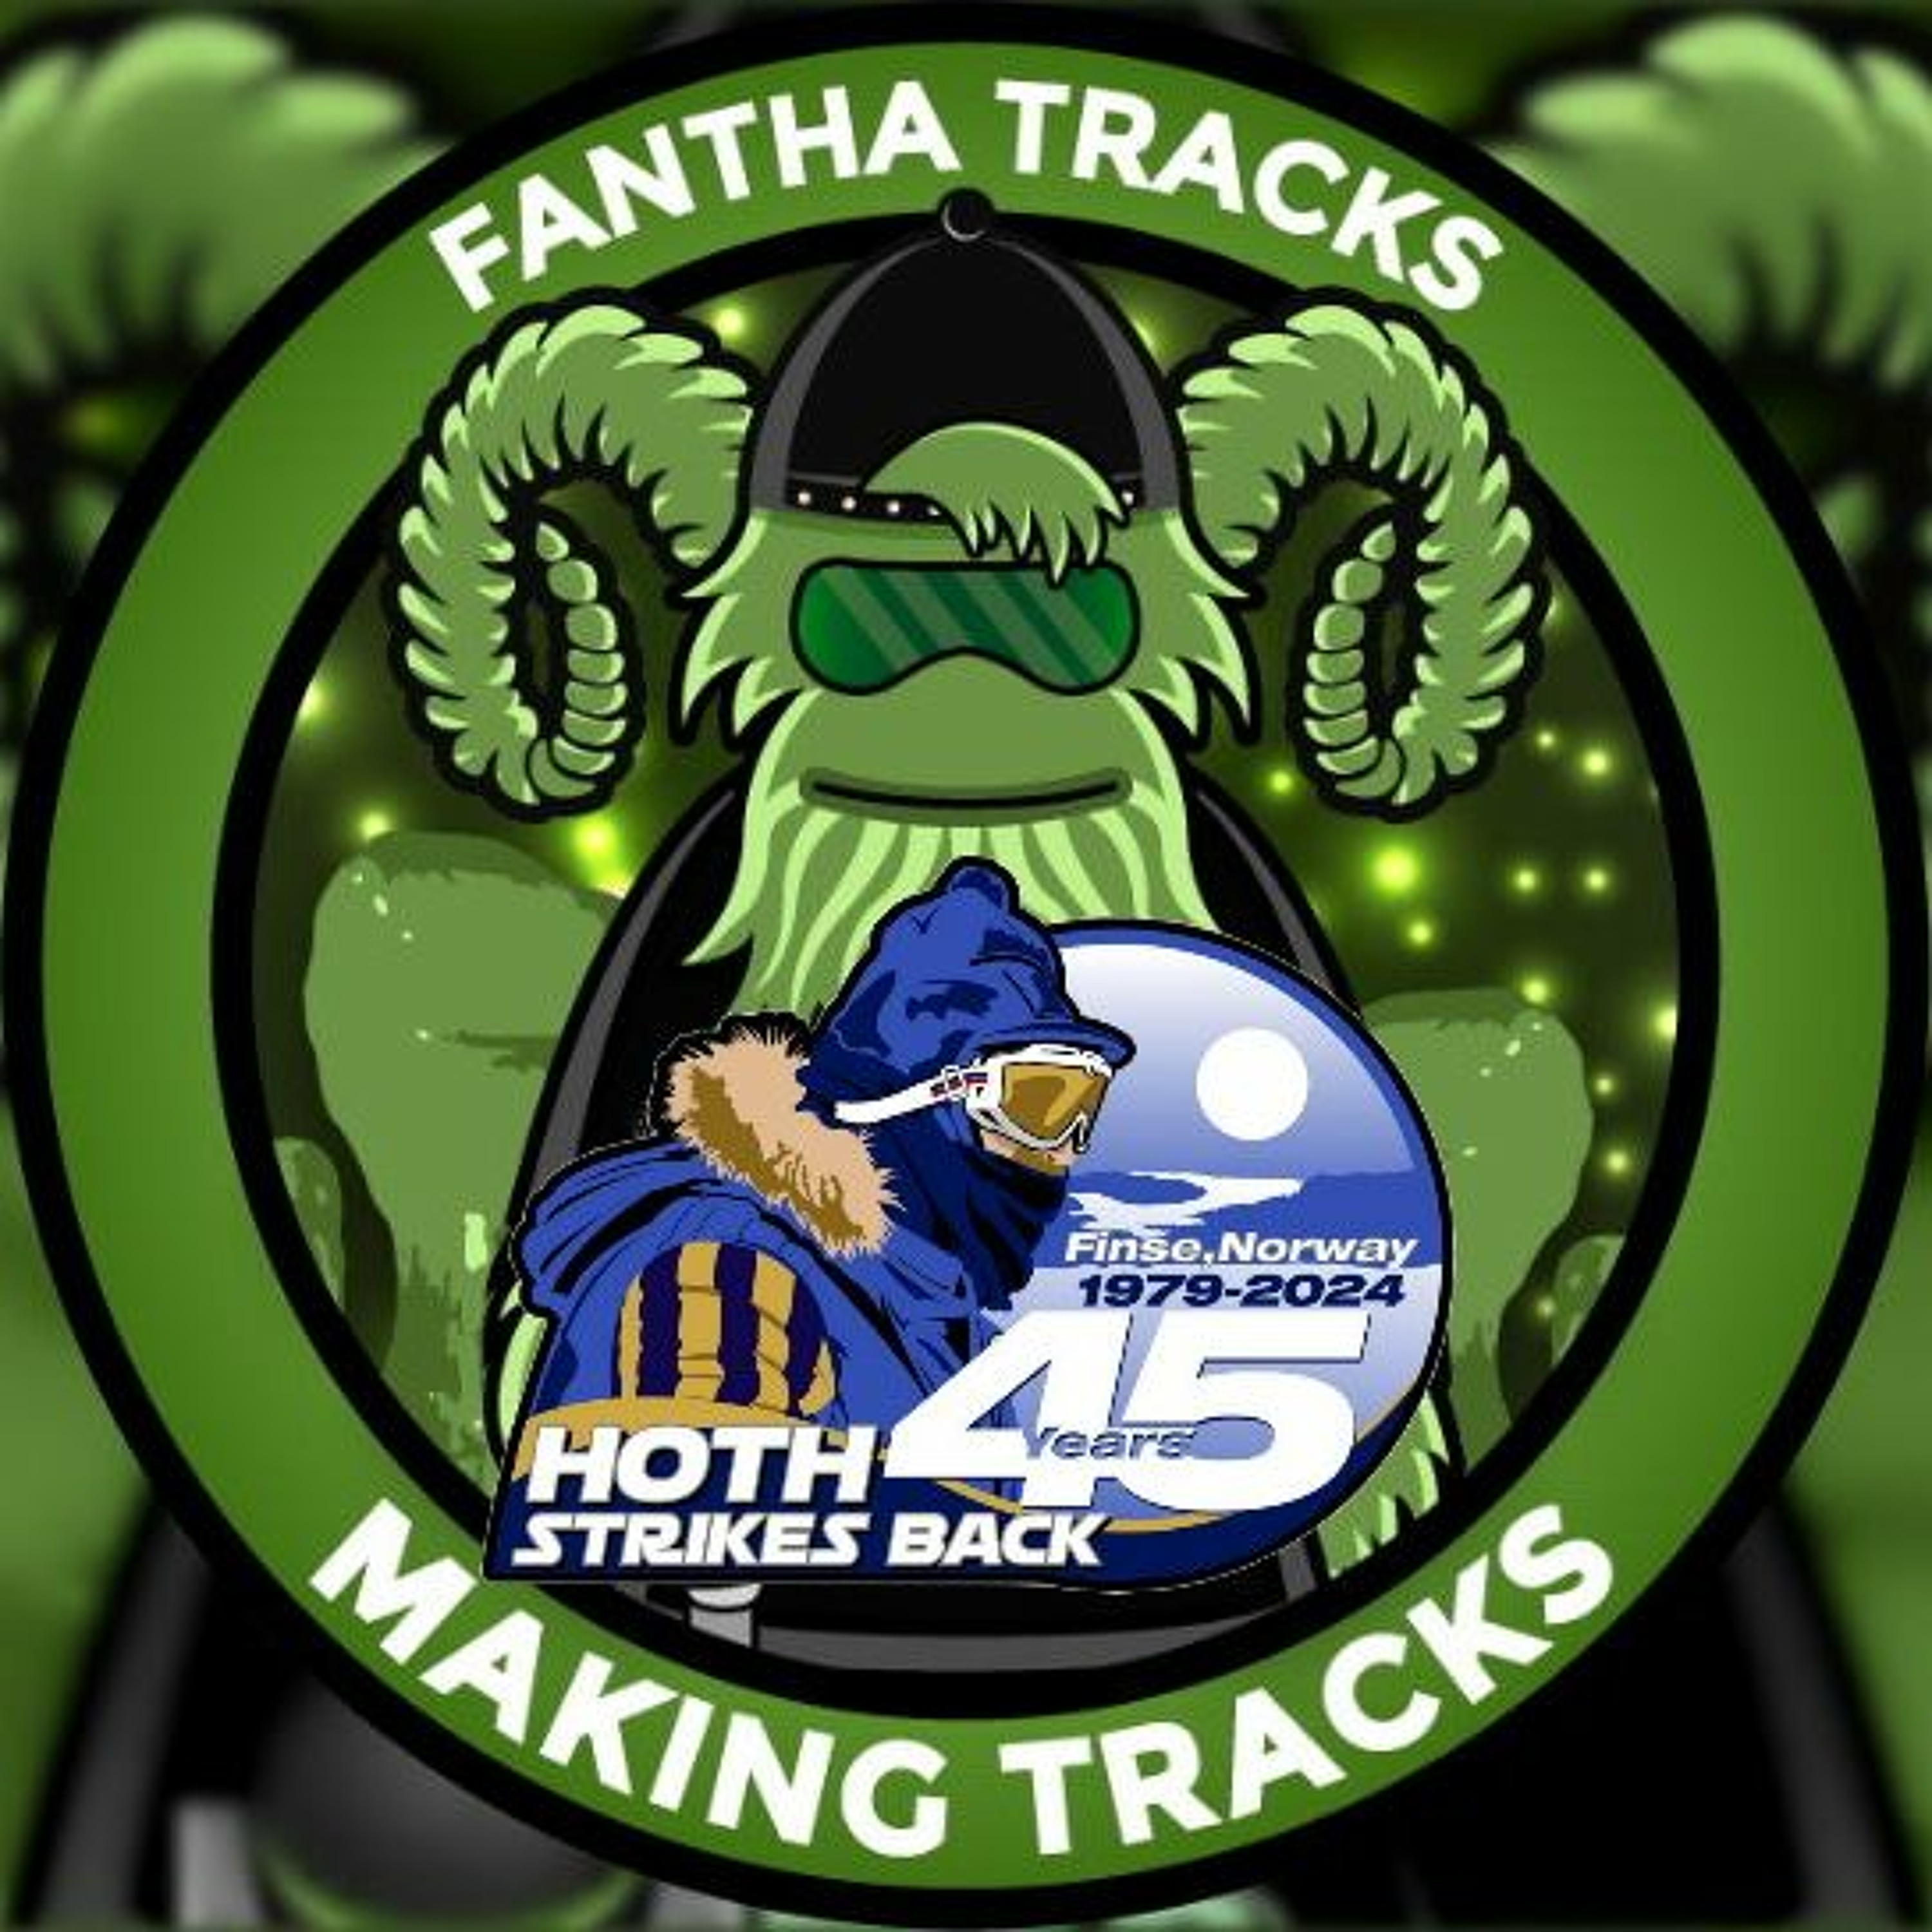 Making Tracks at Hoth Strikes Back 2024: How The Empire Struck Finse panel